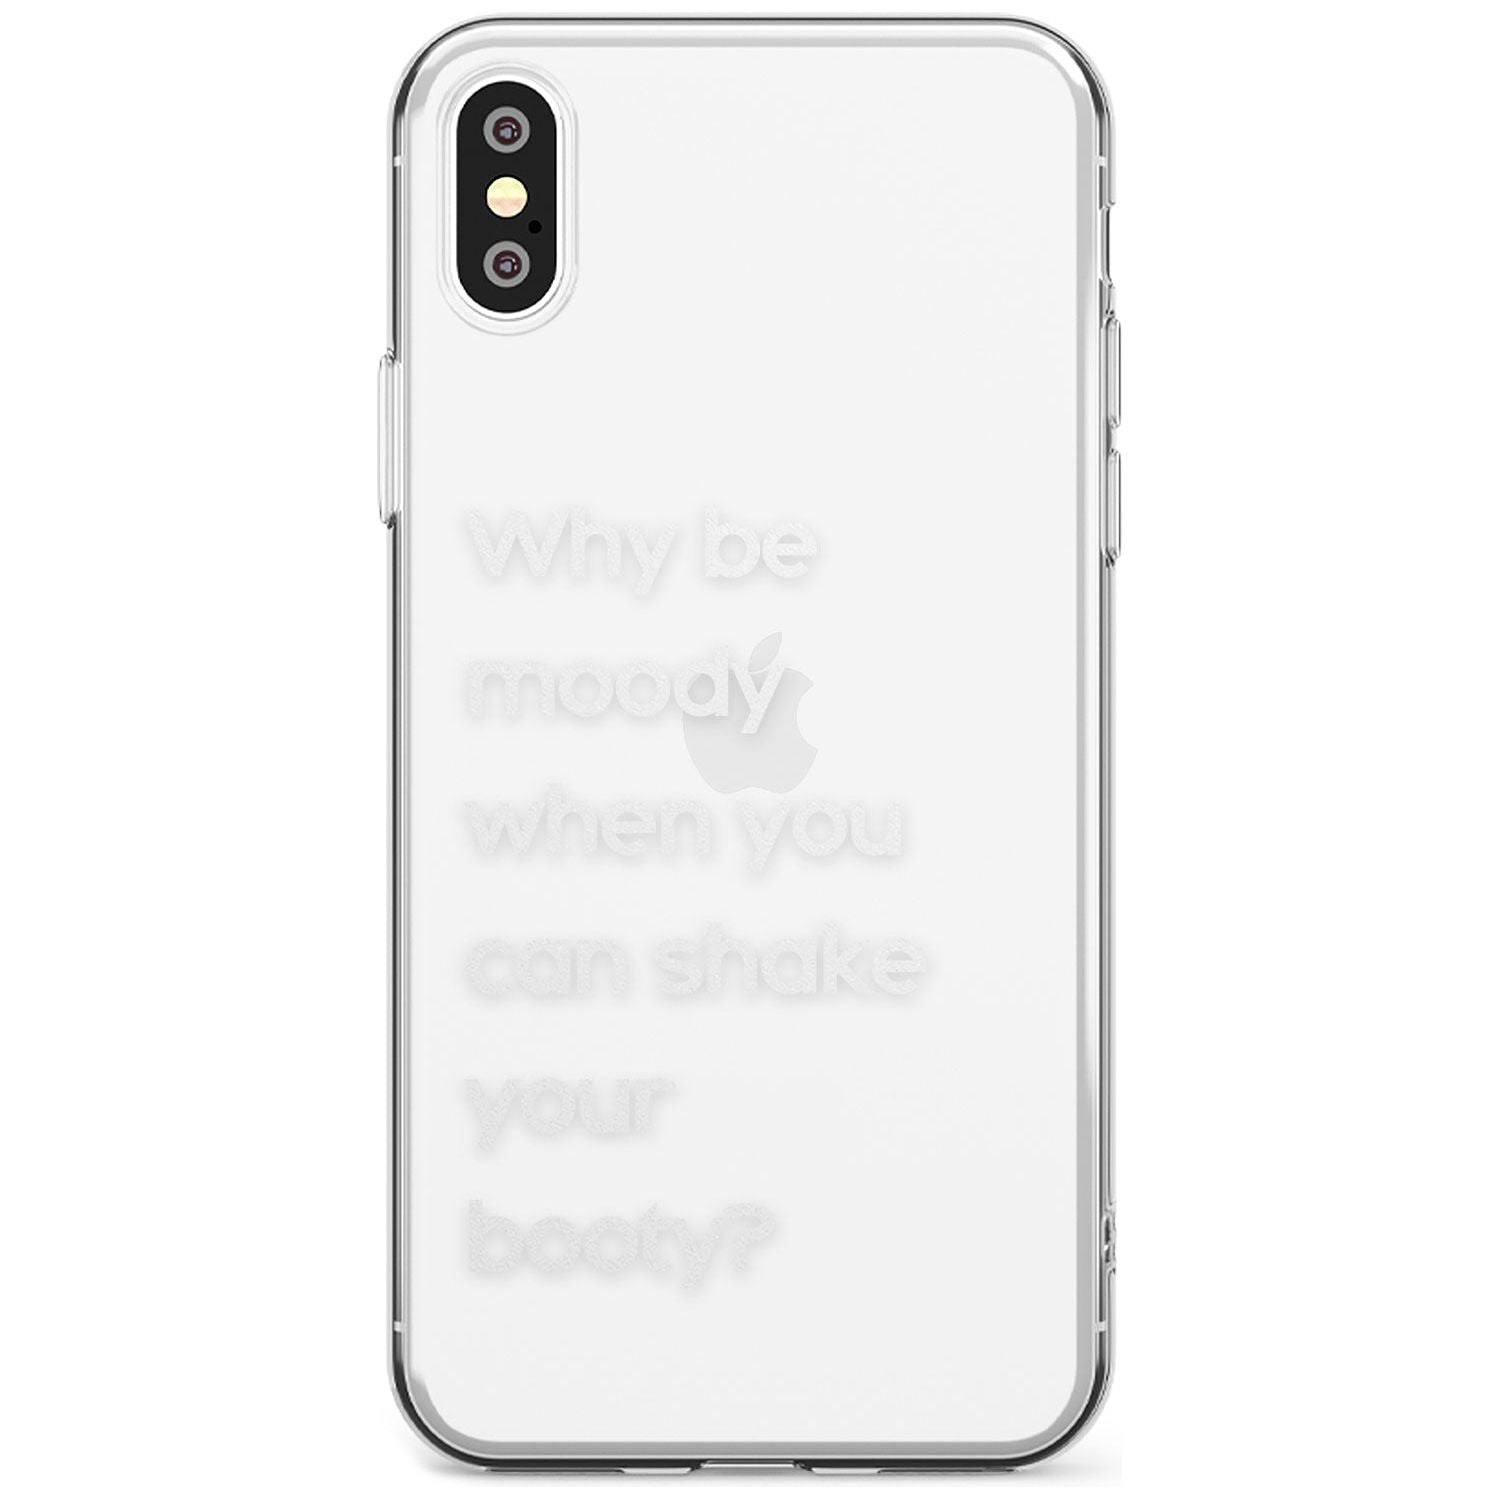 Why be moody? (White) Black Impact Phone Case for iPhone X XS Max XR